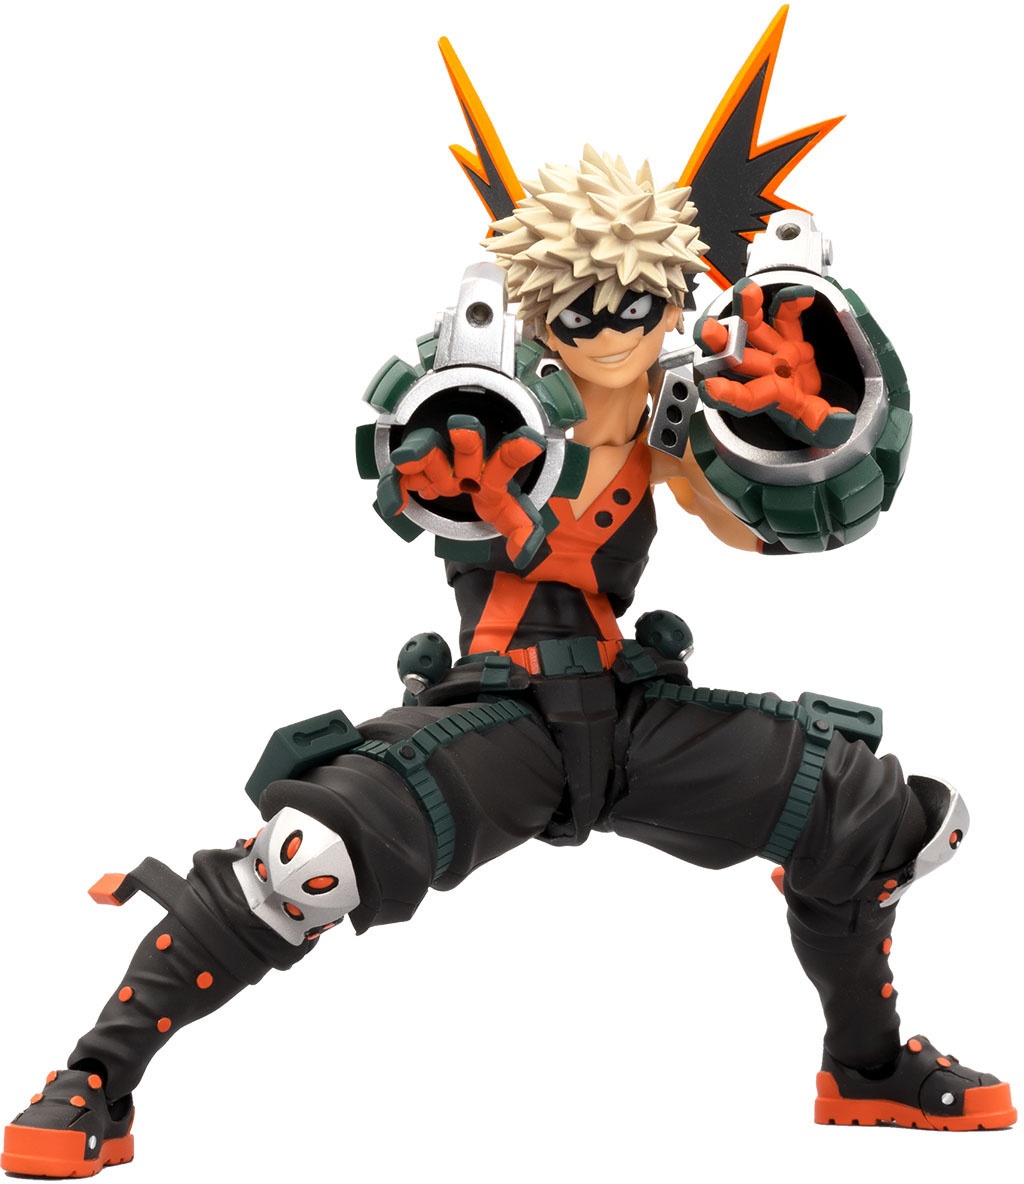 abbey whiting recommends my hero academia pictures of bakugo pic